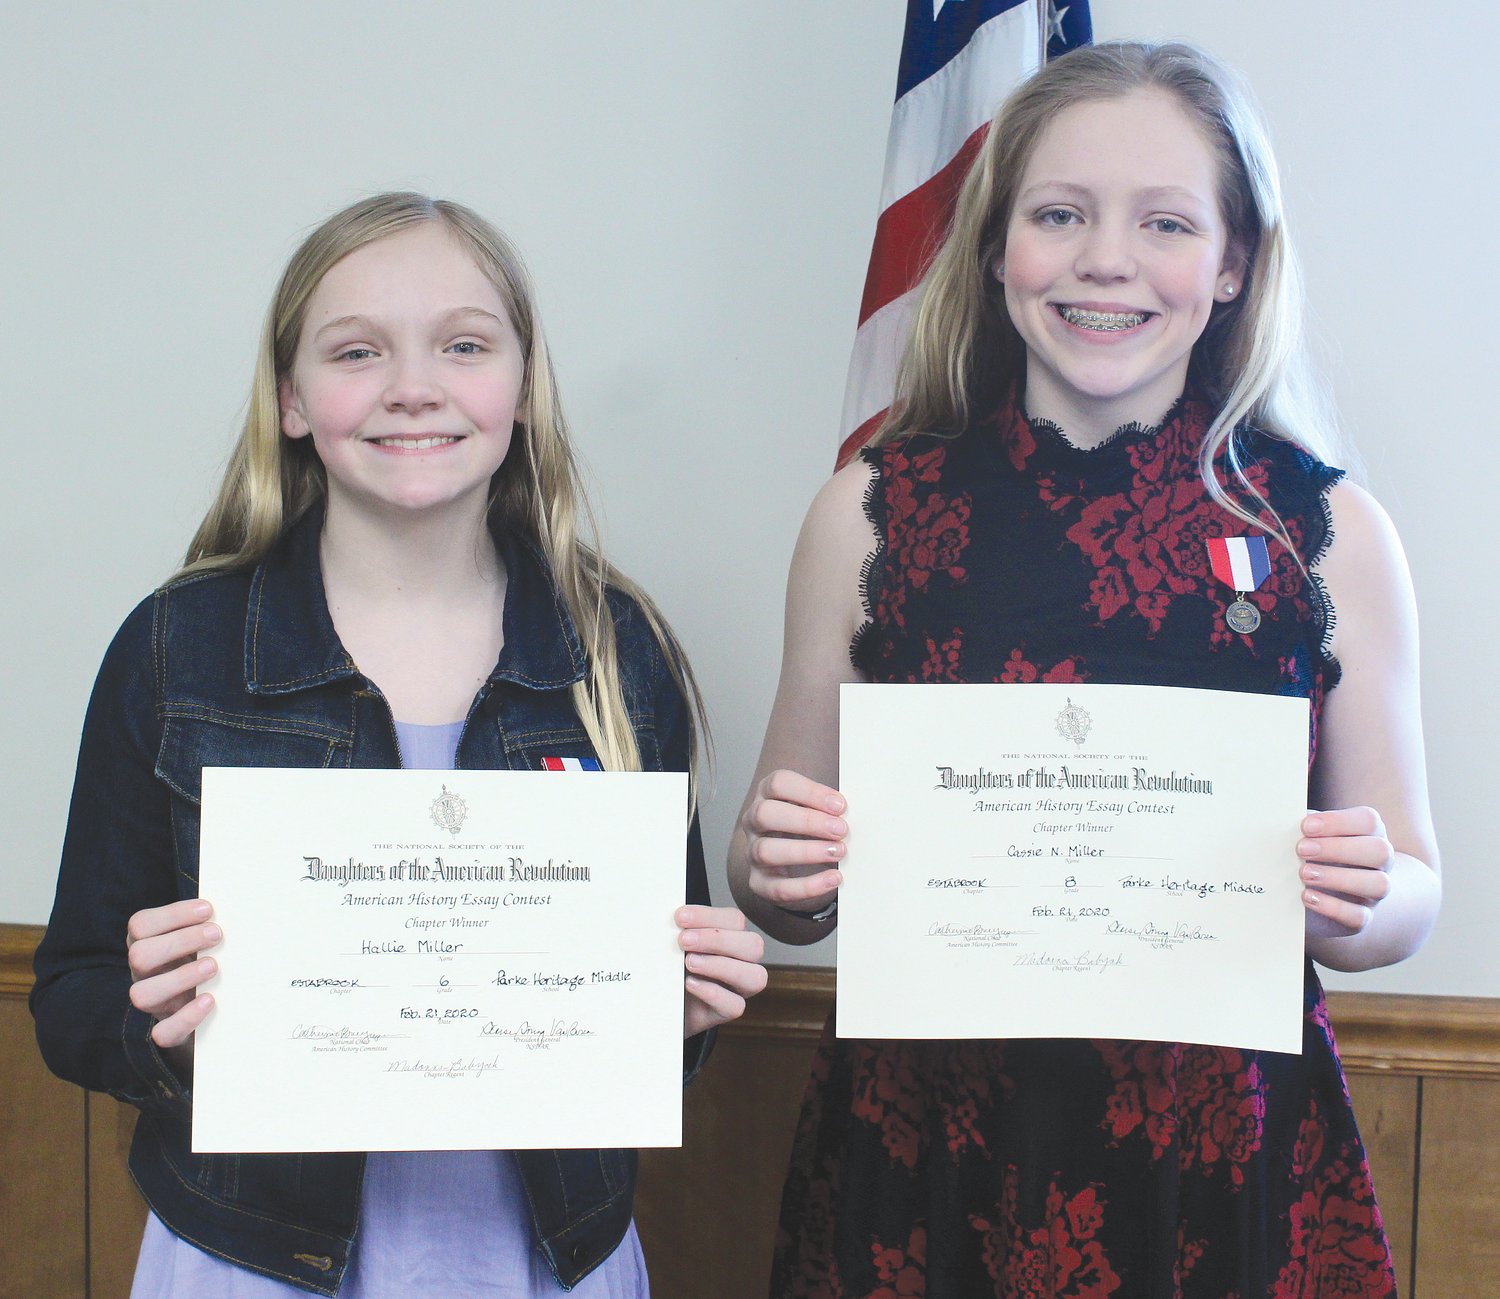 The members of the Daughters of the American Revolution organization recognized the winners of their essay contest in a special ceremony Feb. 21 at the Parke County fairgrounds meeting room. Grade winners were sixth grade, Hallie Miller, and eighth grade, Cassie Miller, both of Parke Heritage Middle School. The essay topic was ”The Voyage of the Mayflower.” The essays advanced to the state level. Both Hallie and Cassie placed second in the state and will be honored at a banquet May 17 in Indianapolis. Pictured are Hallie, left, and Cassie are the daughters of Matt and Melanie Miller of Tangier.